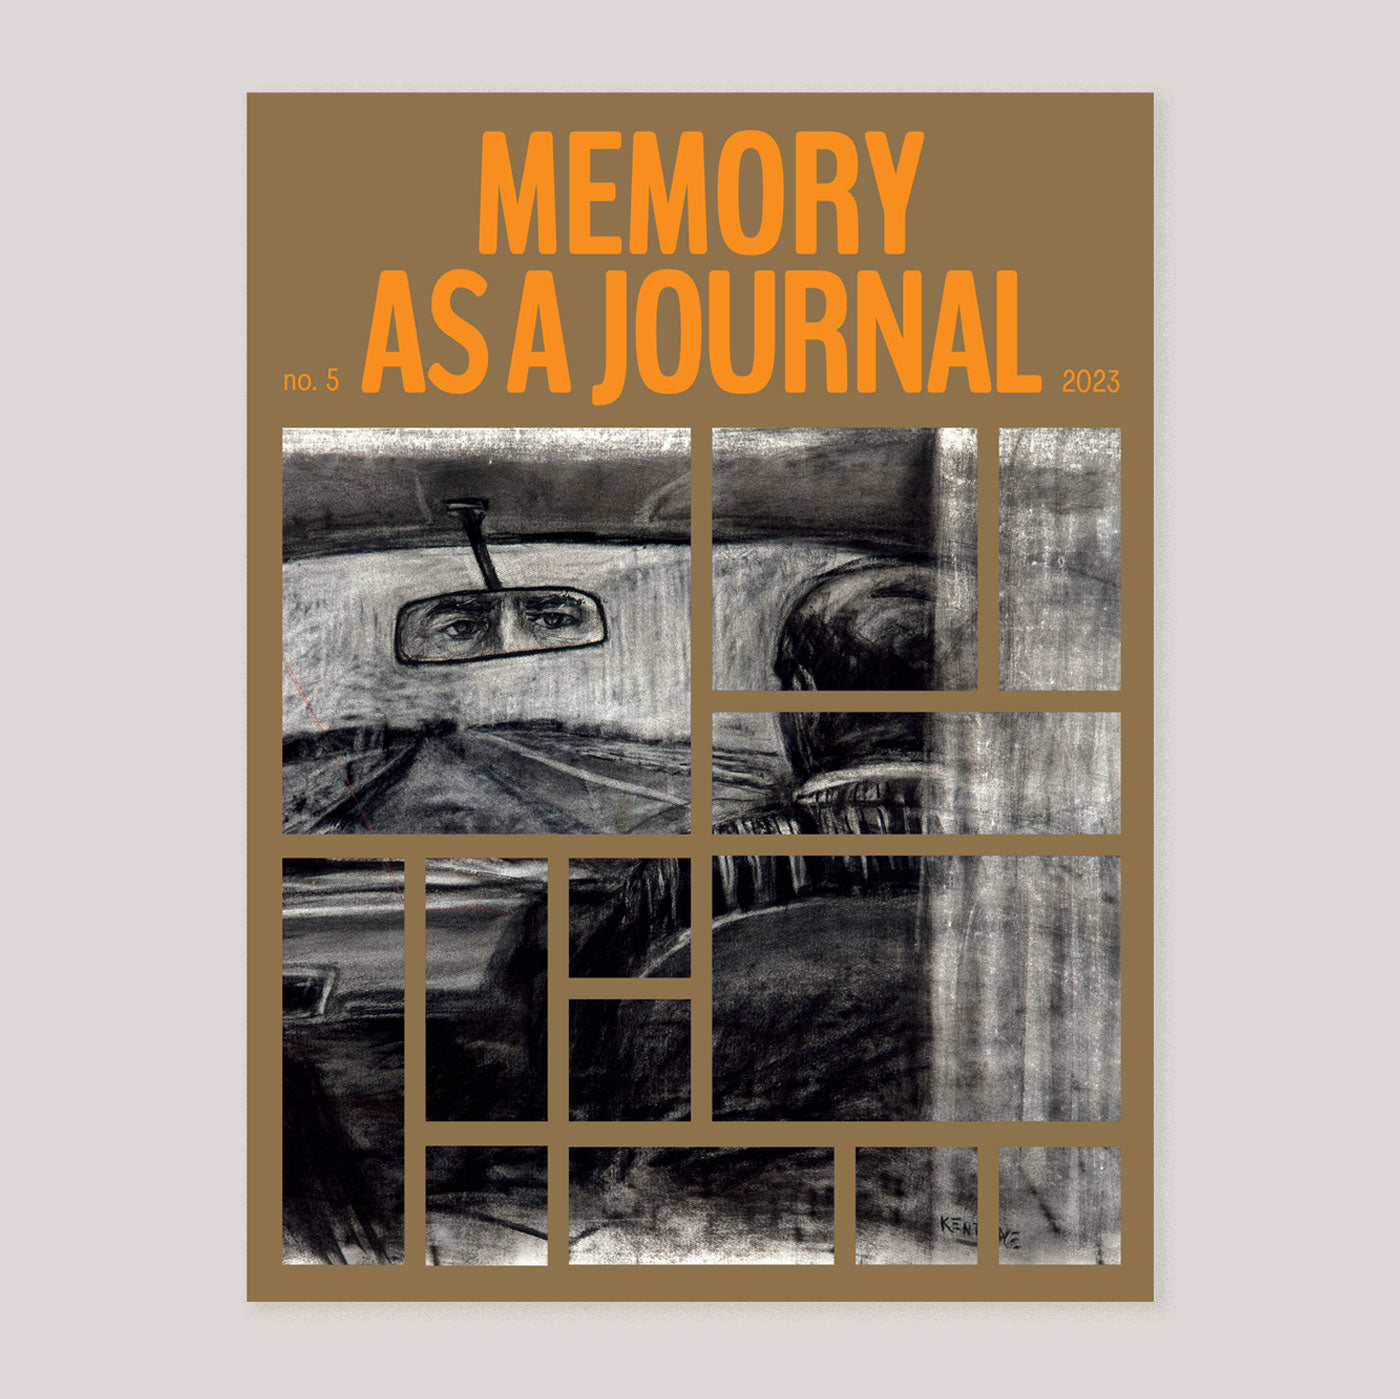 As A Journal #5 | Memory